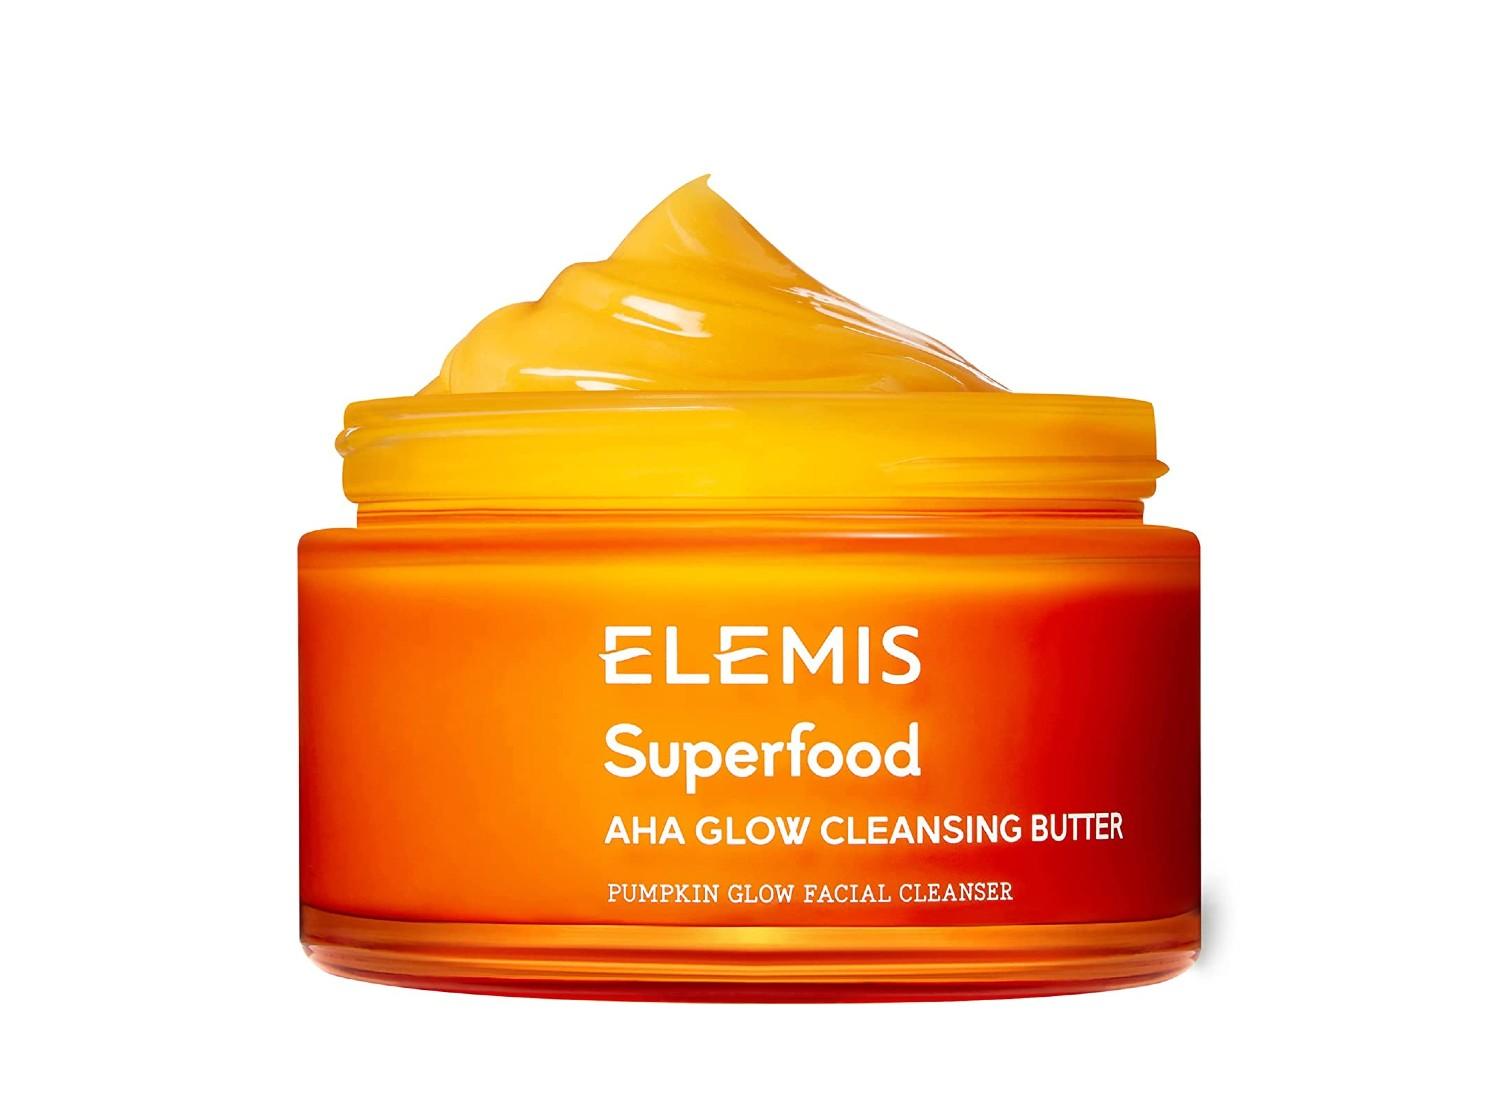 A container of Elemis cleansing butter.